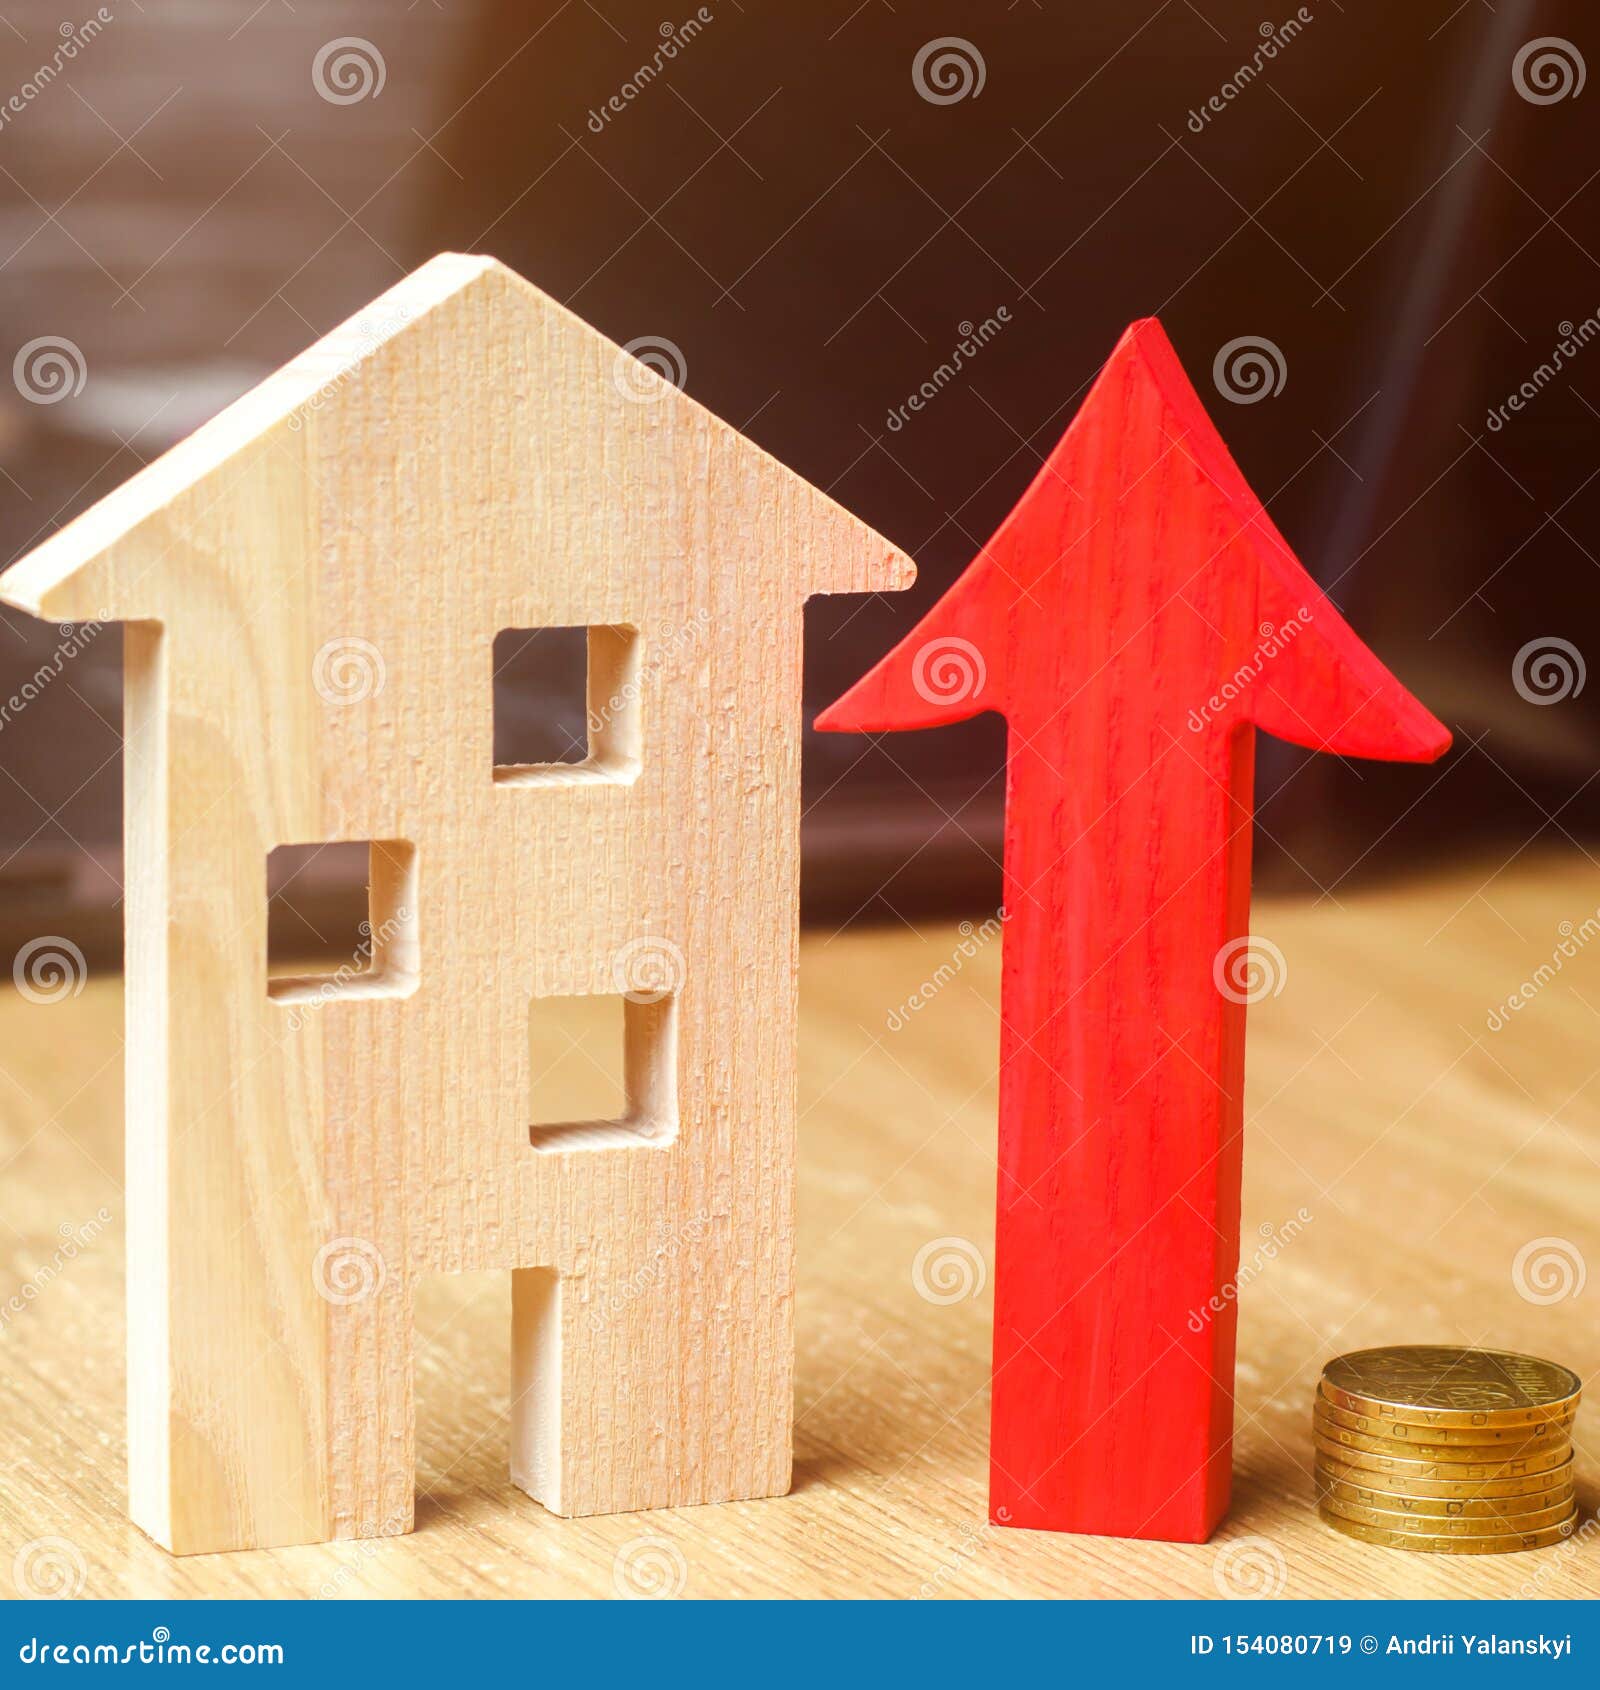 the concept of real estate market growth. the increase in housing prices. rising prices for utilities. increased interest in